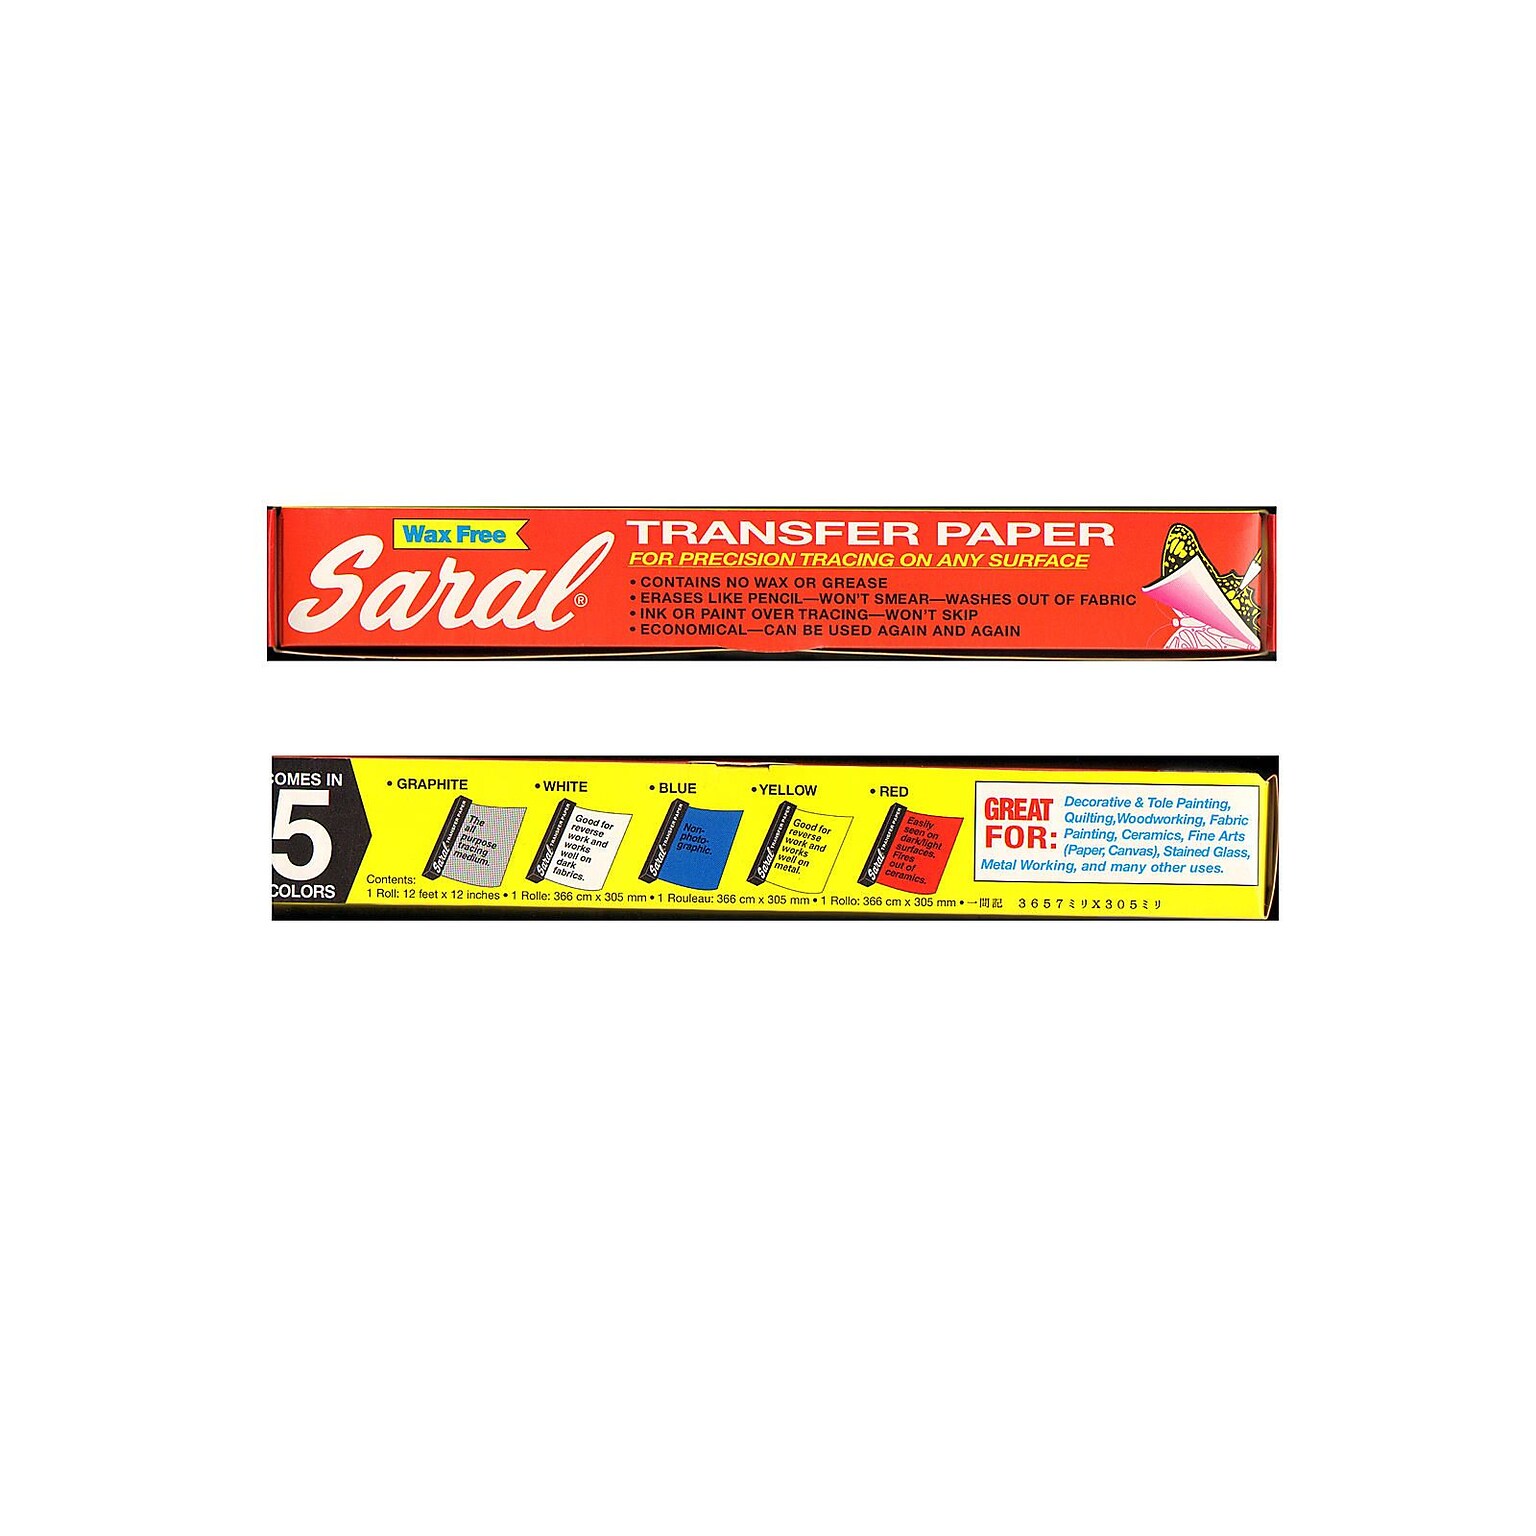 Saral Transfer (Tracing) Paper Graphite All-Purpose 12 1/2 In. X 12 Ft. Roll (RL GRAPHITE)